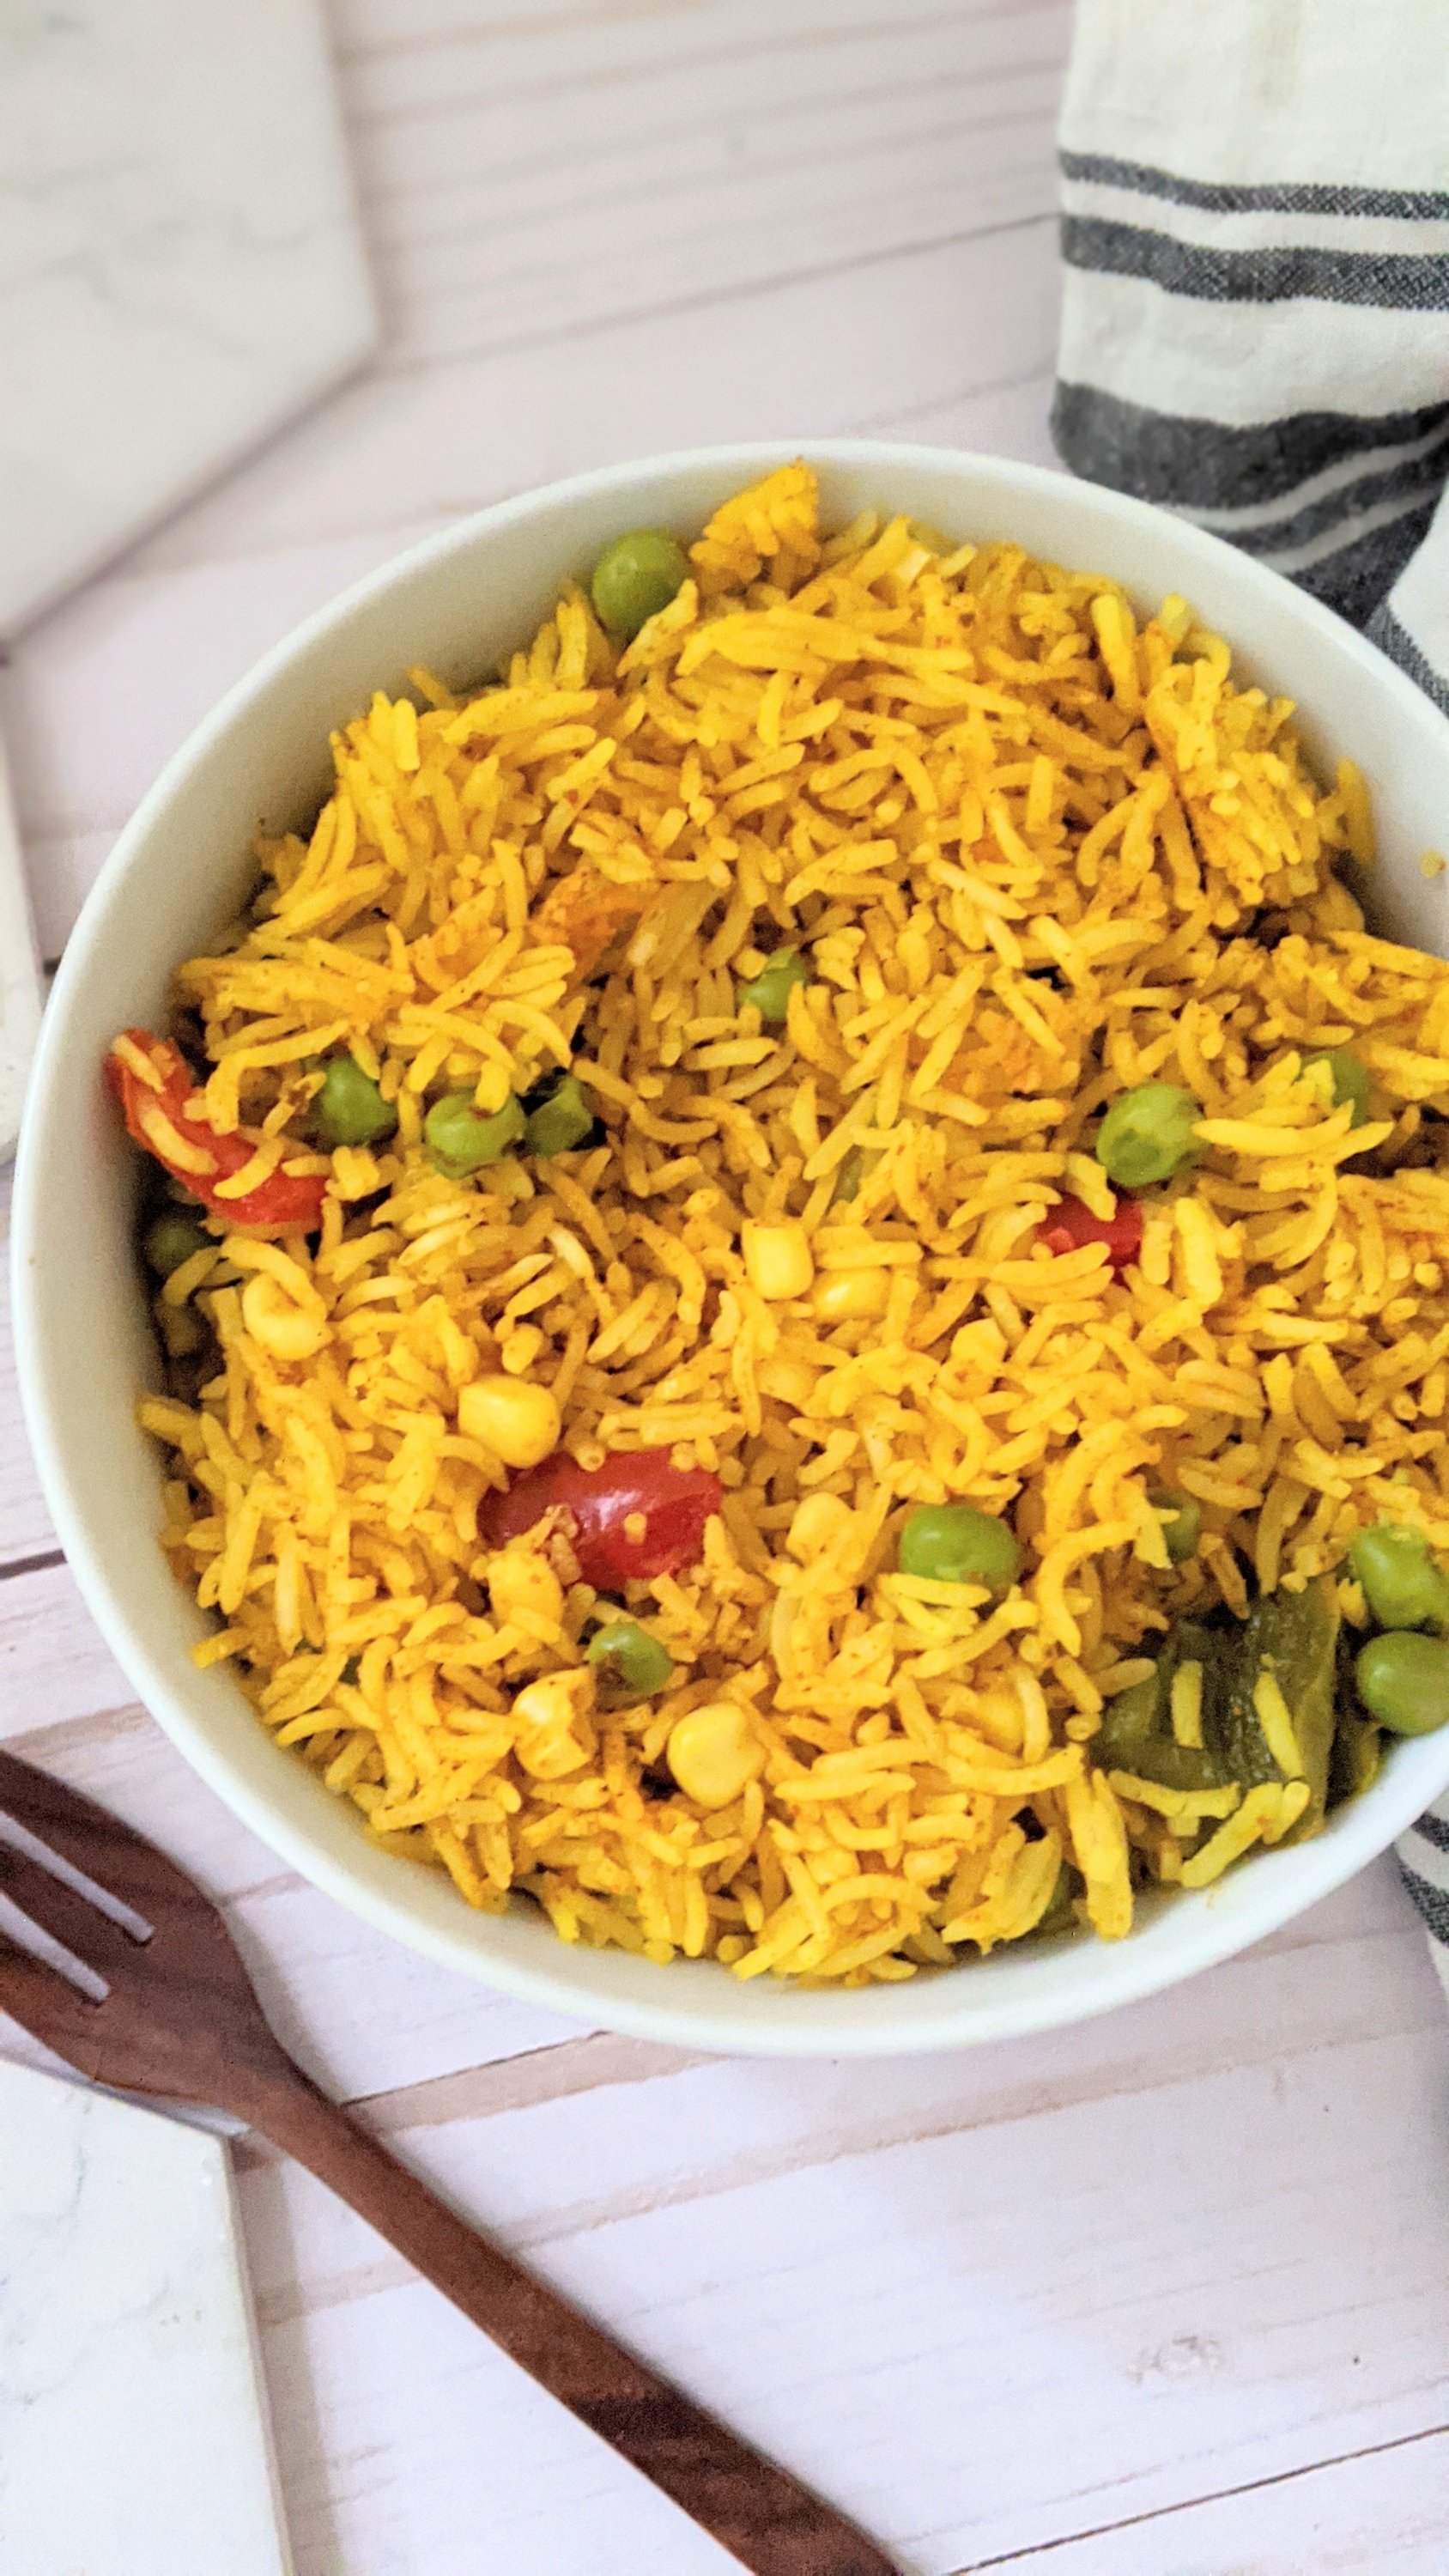 lazy rice cooker recipes one pot yellow rice in the rice steamer recipes for turmeric spanish rice mexican yellow rice without saffron recipe rice for shawarma recipes